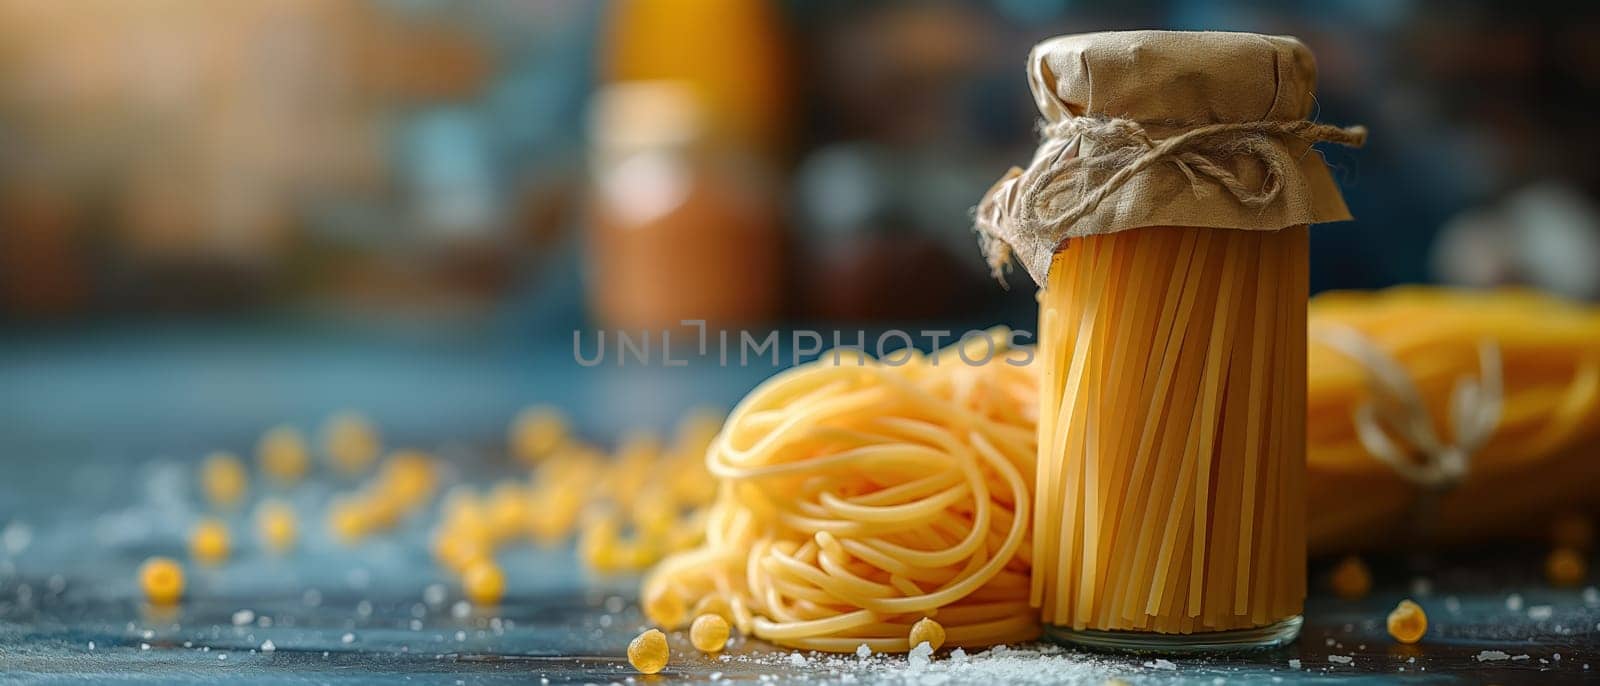 Food background with spaghetti recipe ingredient on blue texture background by Fischeron